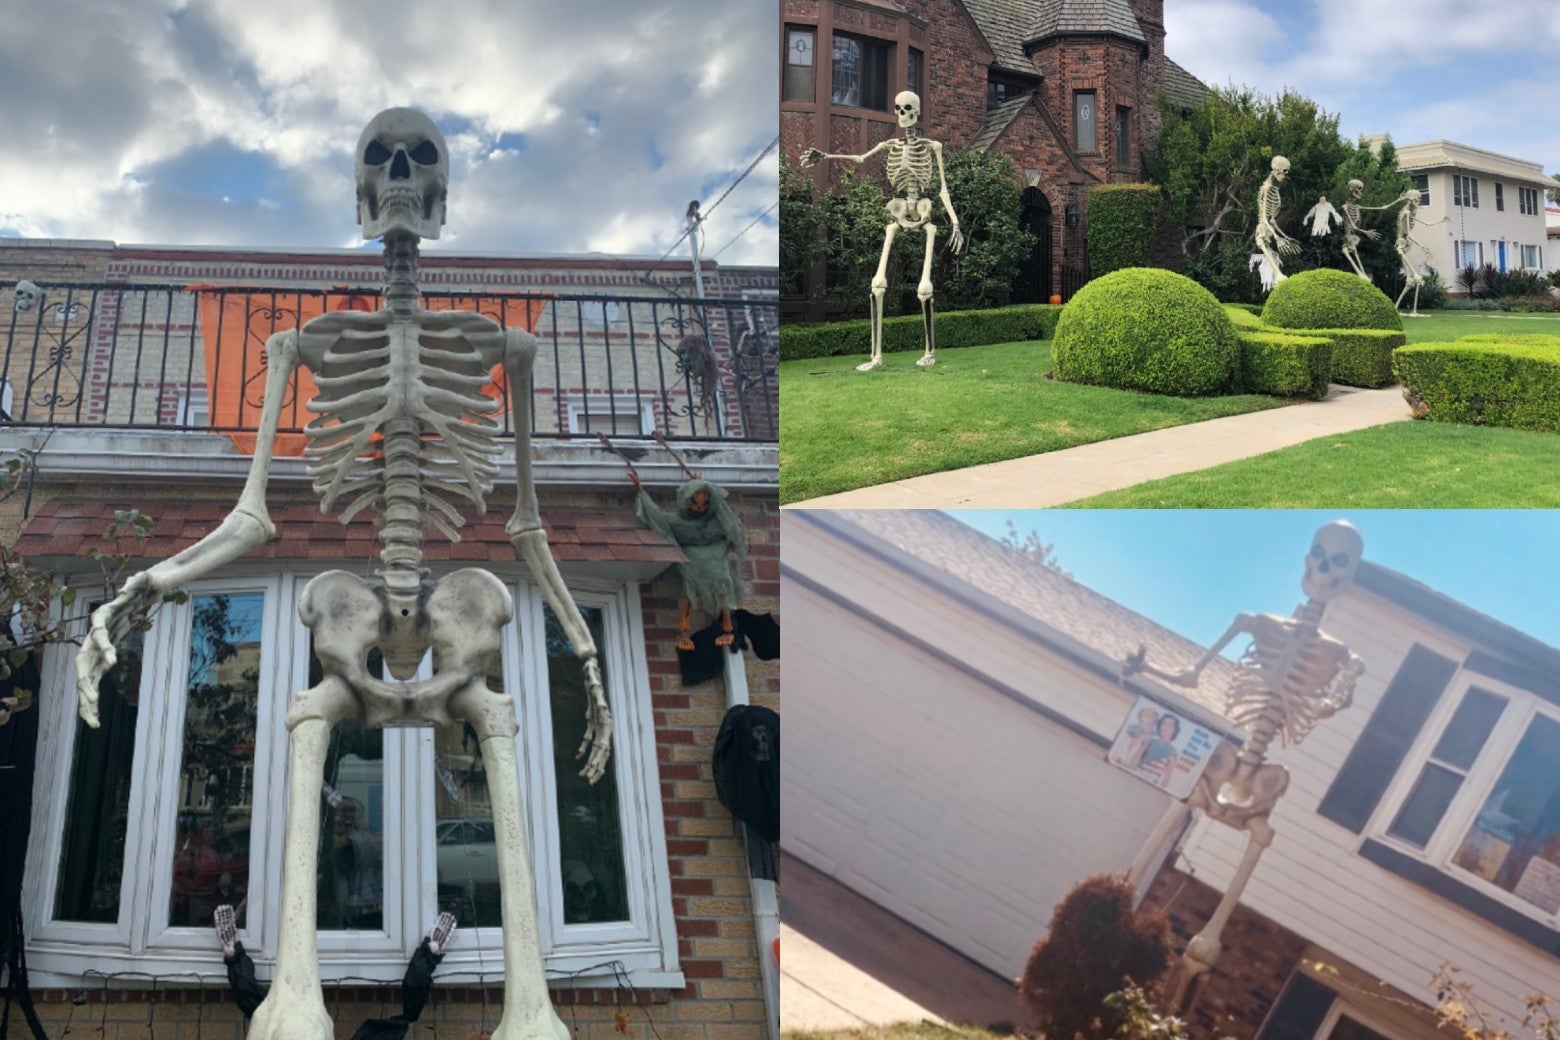 The 12-foot-tall tall skeleton Home Depot is selling for Halloween